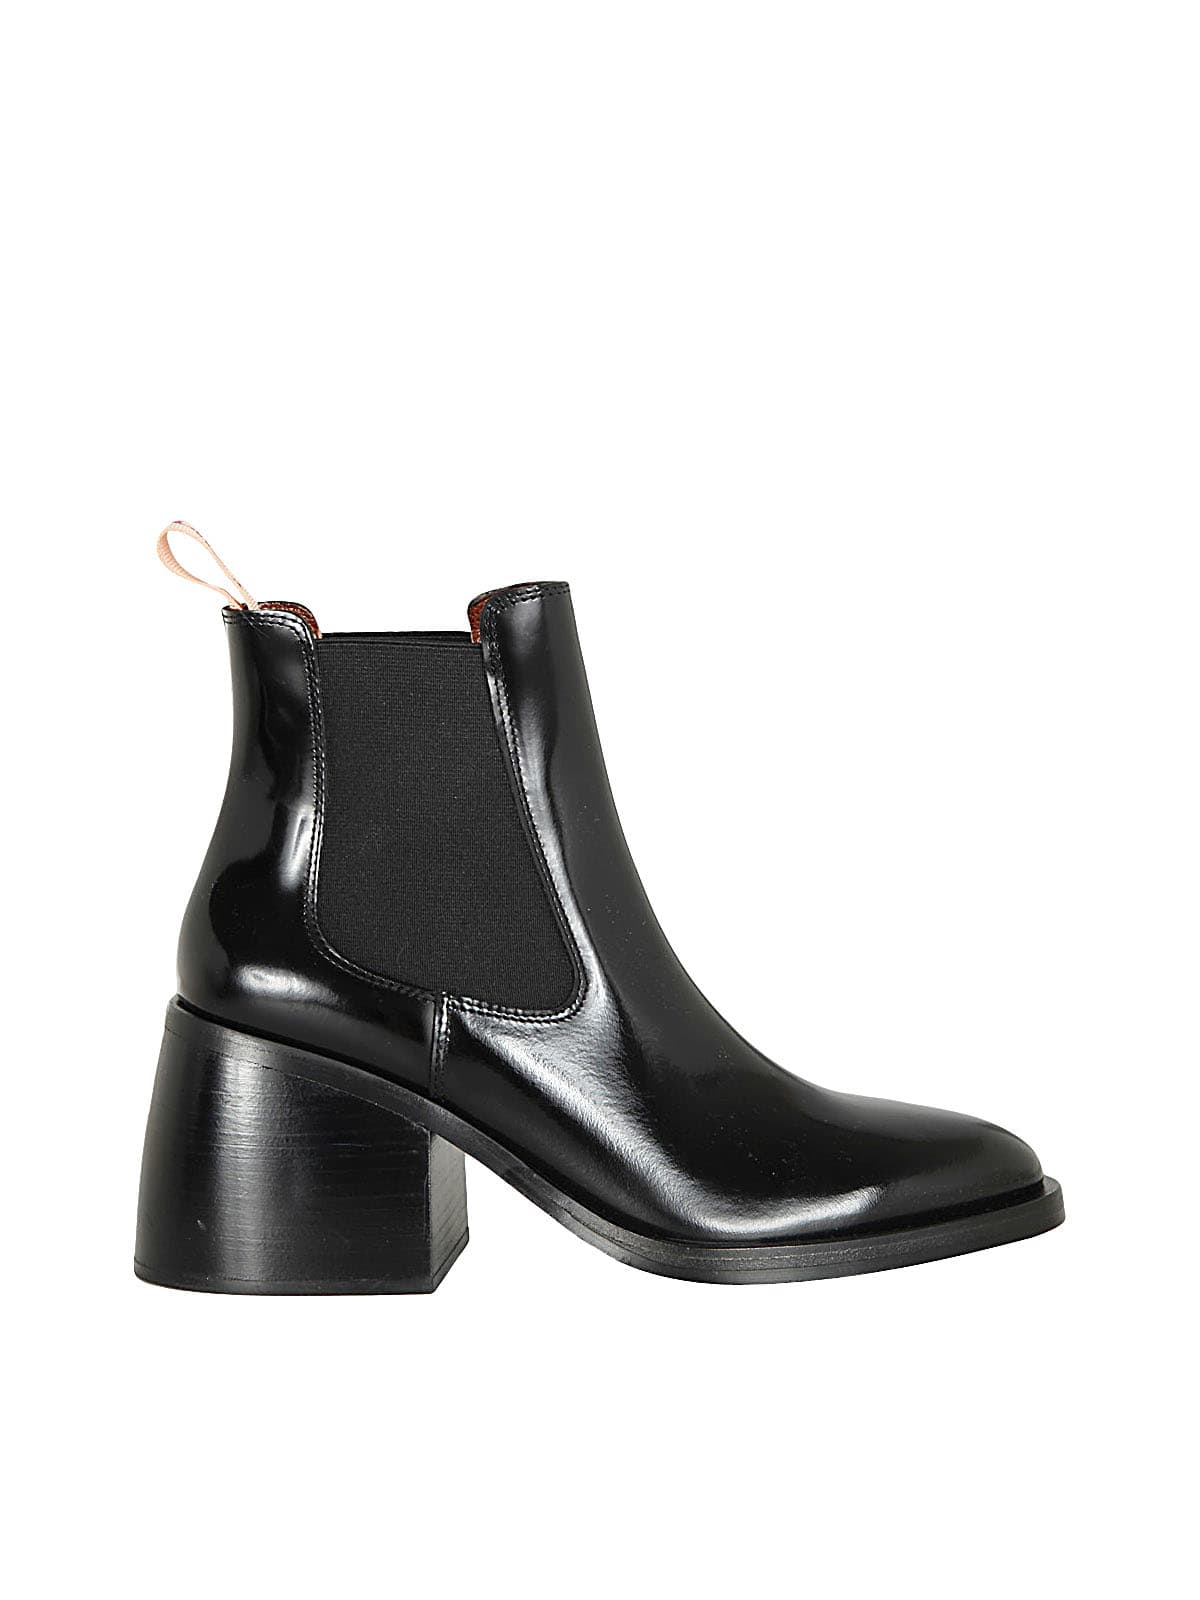 See by Chloé July Ankle Boots